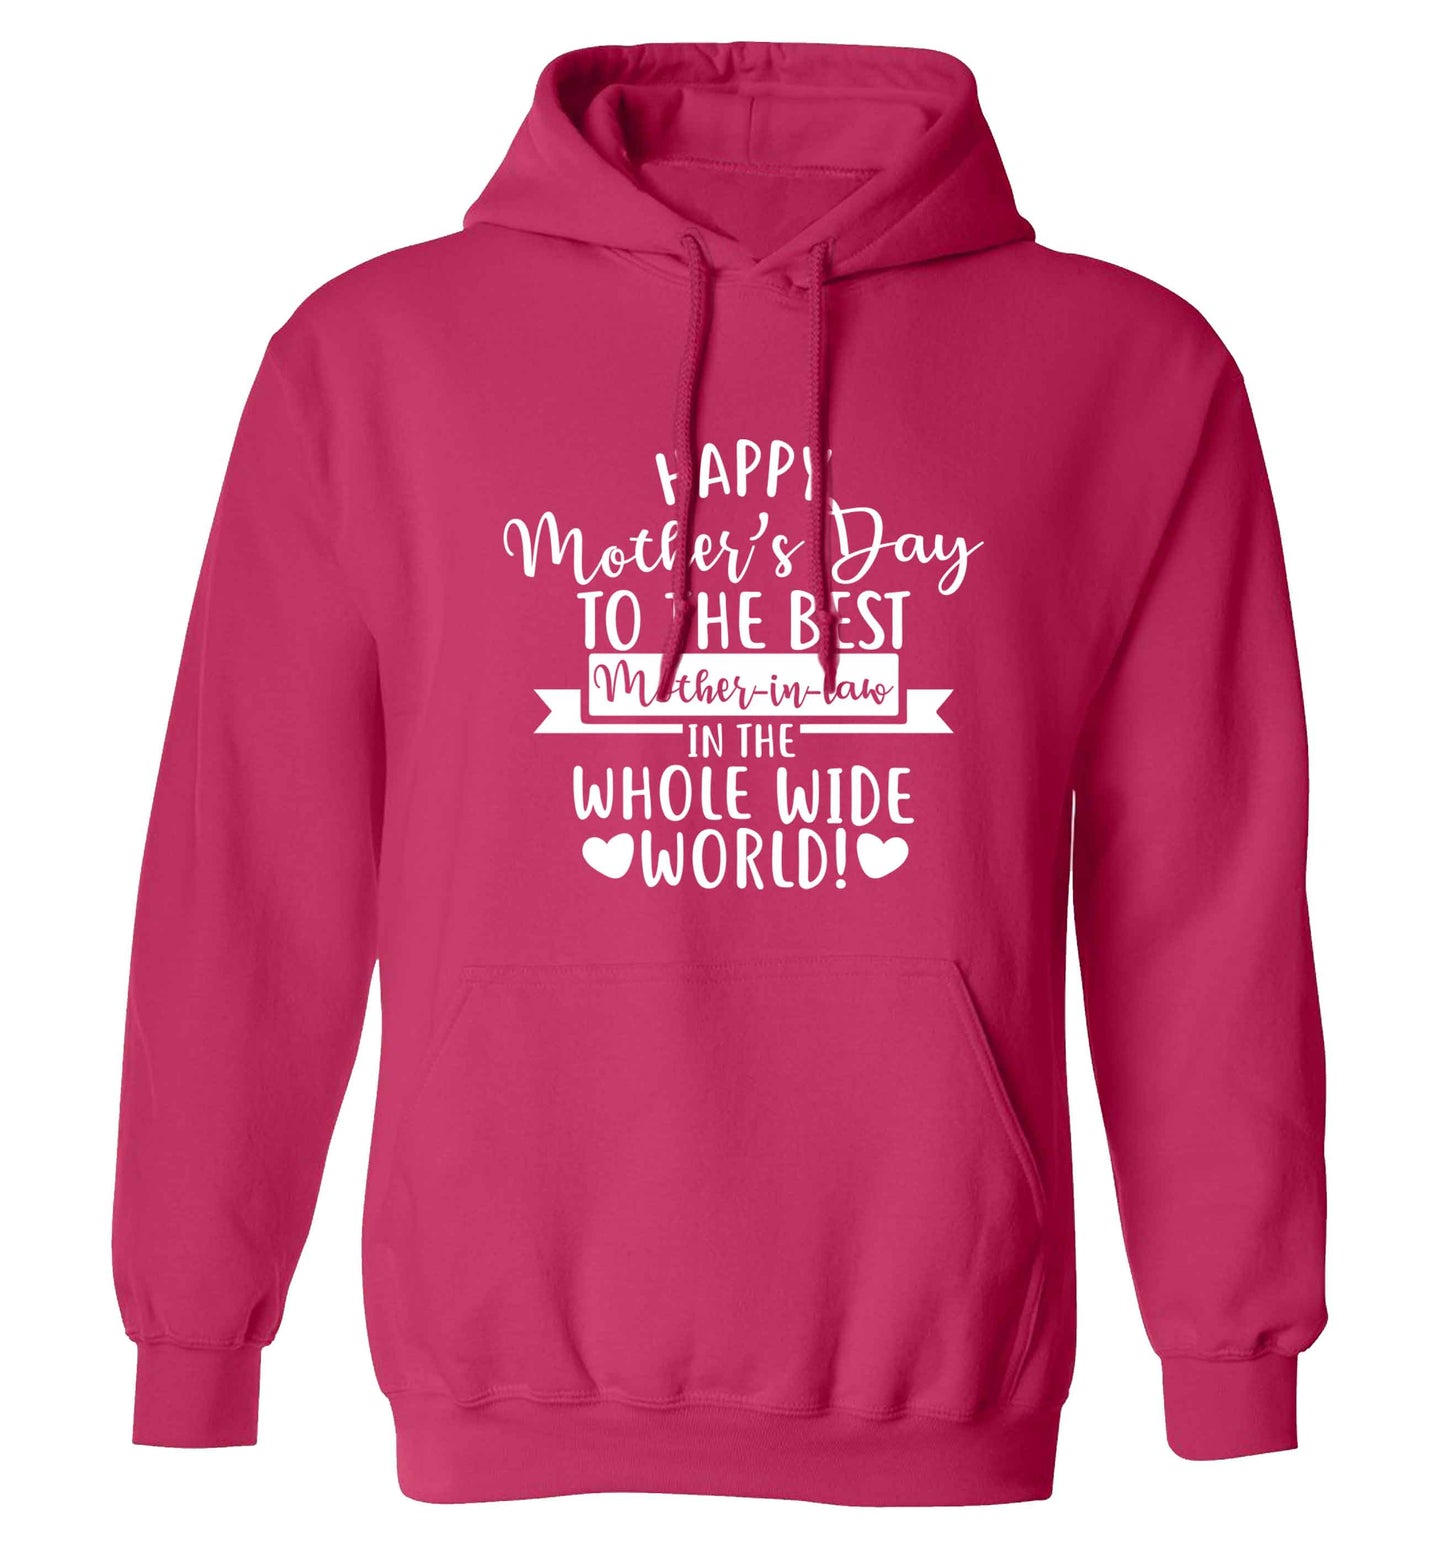 Happy mother's day to the best mother-in law in the world adults unisex pink hoodie 2XL